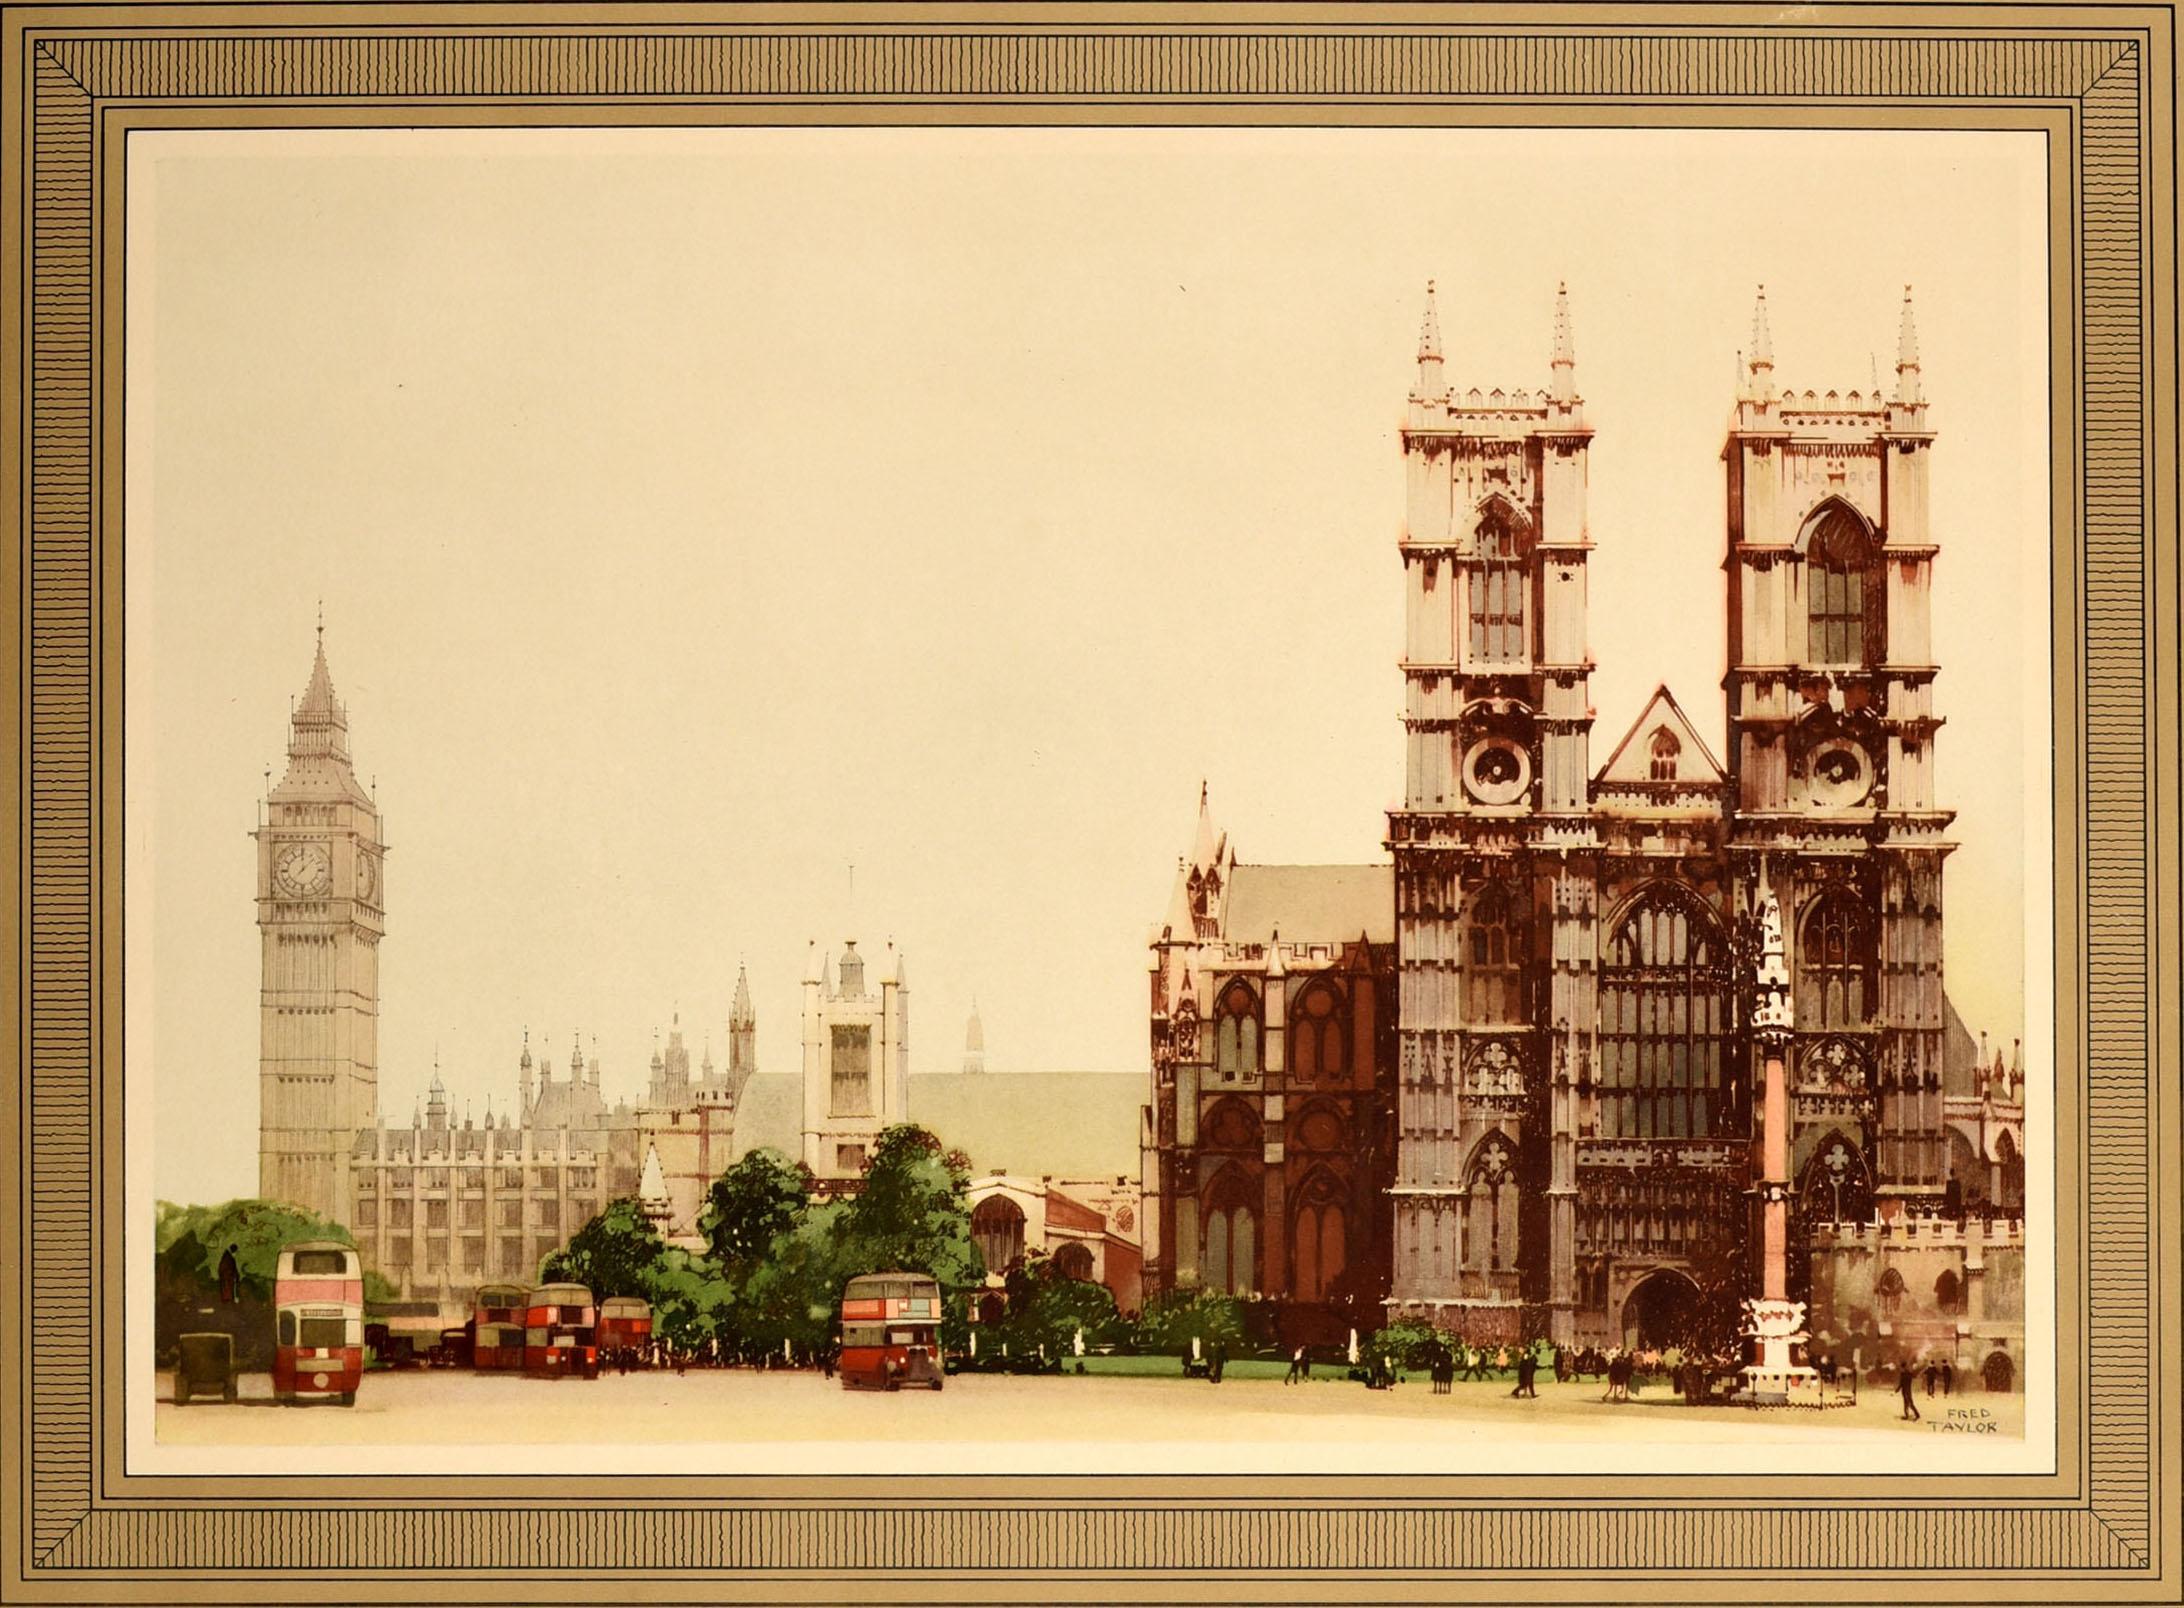 Original vintage post-war London Underground Transport poster for London Westminster Abbey featuring artwork by the notable British artist Fred Taylor (1875-1963) showing London buses and people walking by Westminster Abbey (Collegiate Church of